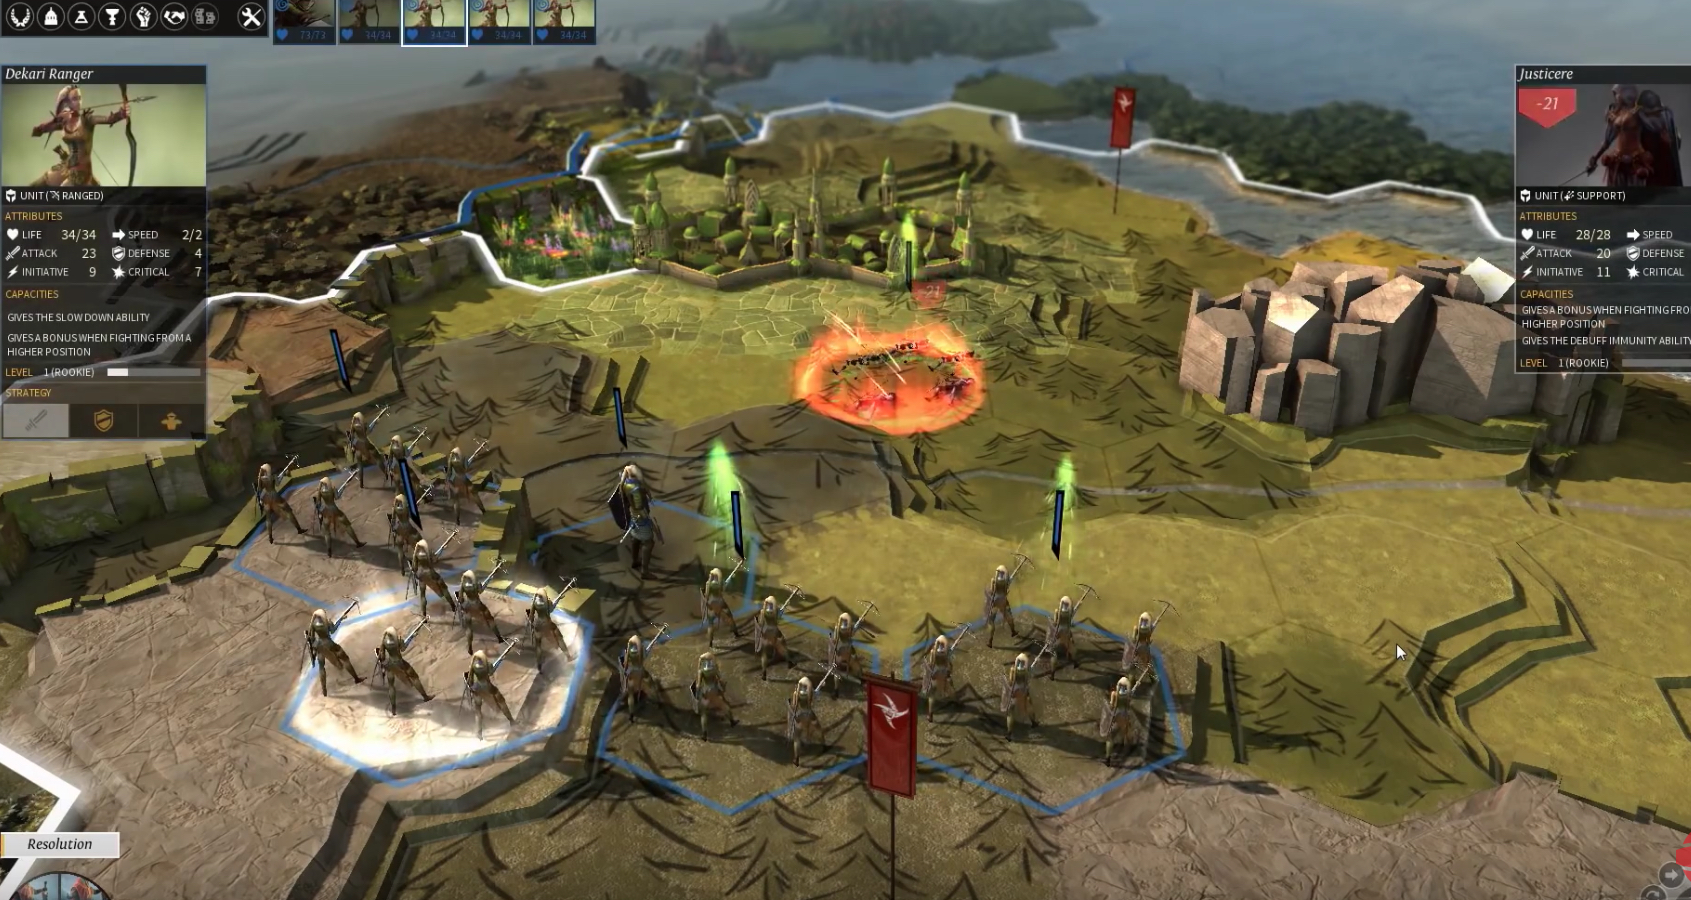 The Turn-Based Fantasy Game Endless Legend Is Now Free On Steam